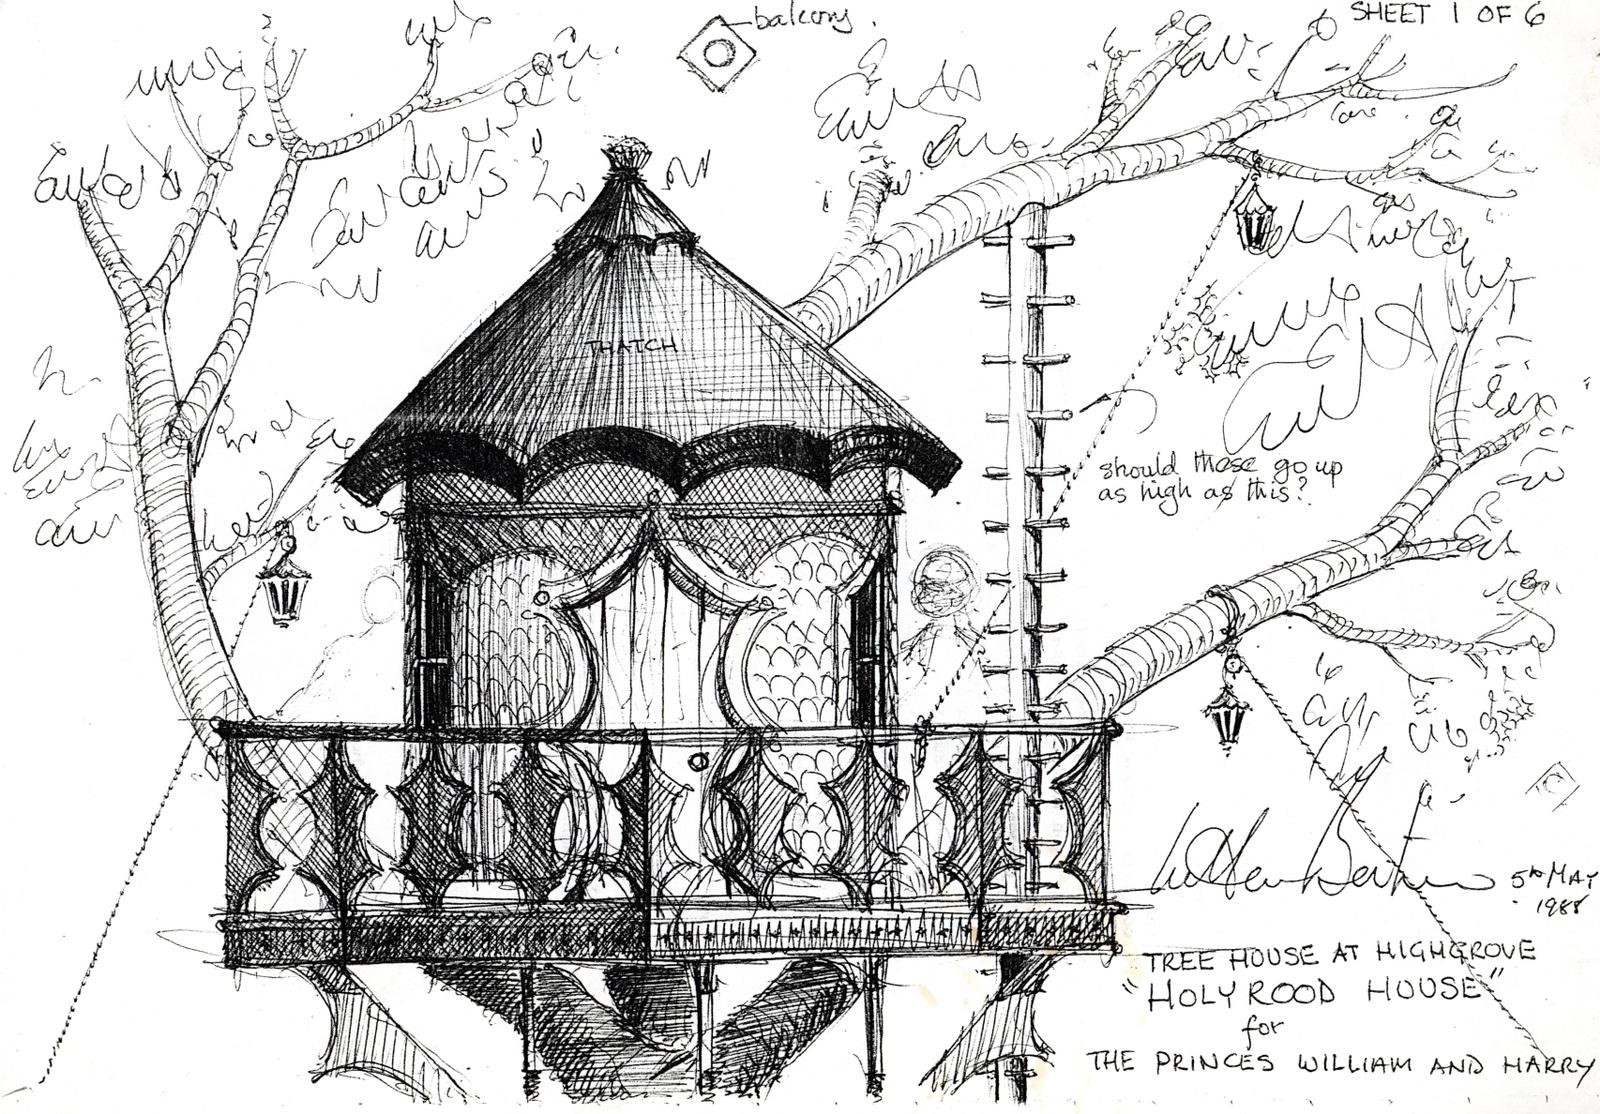 The Tree House design by Willie Bertram